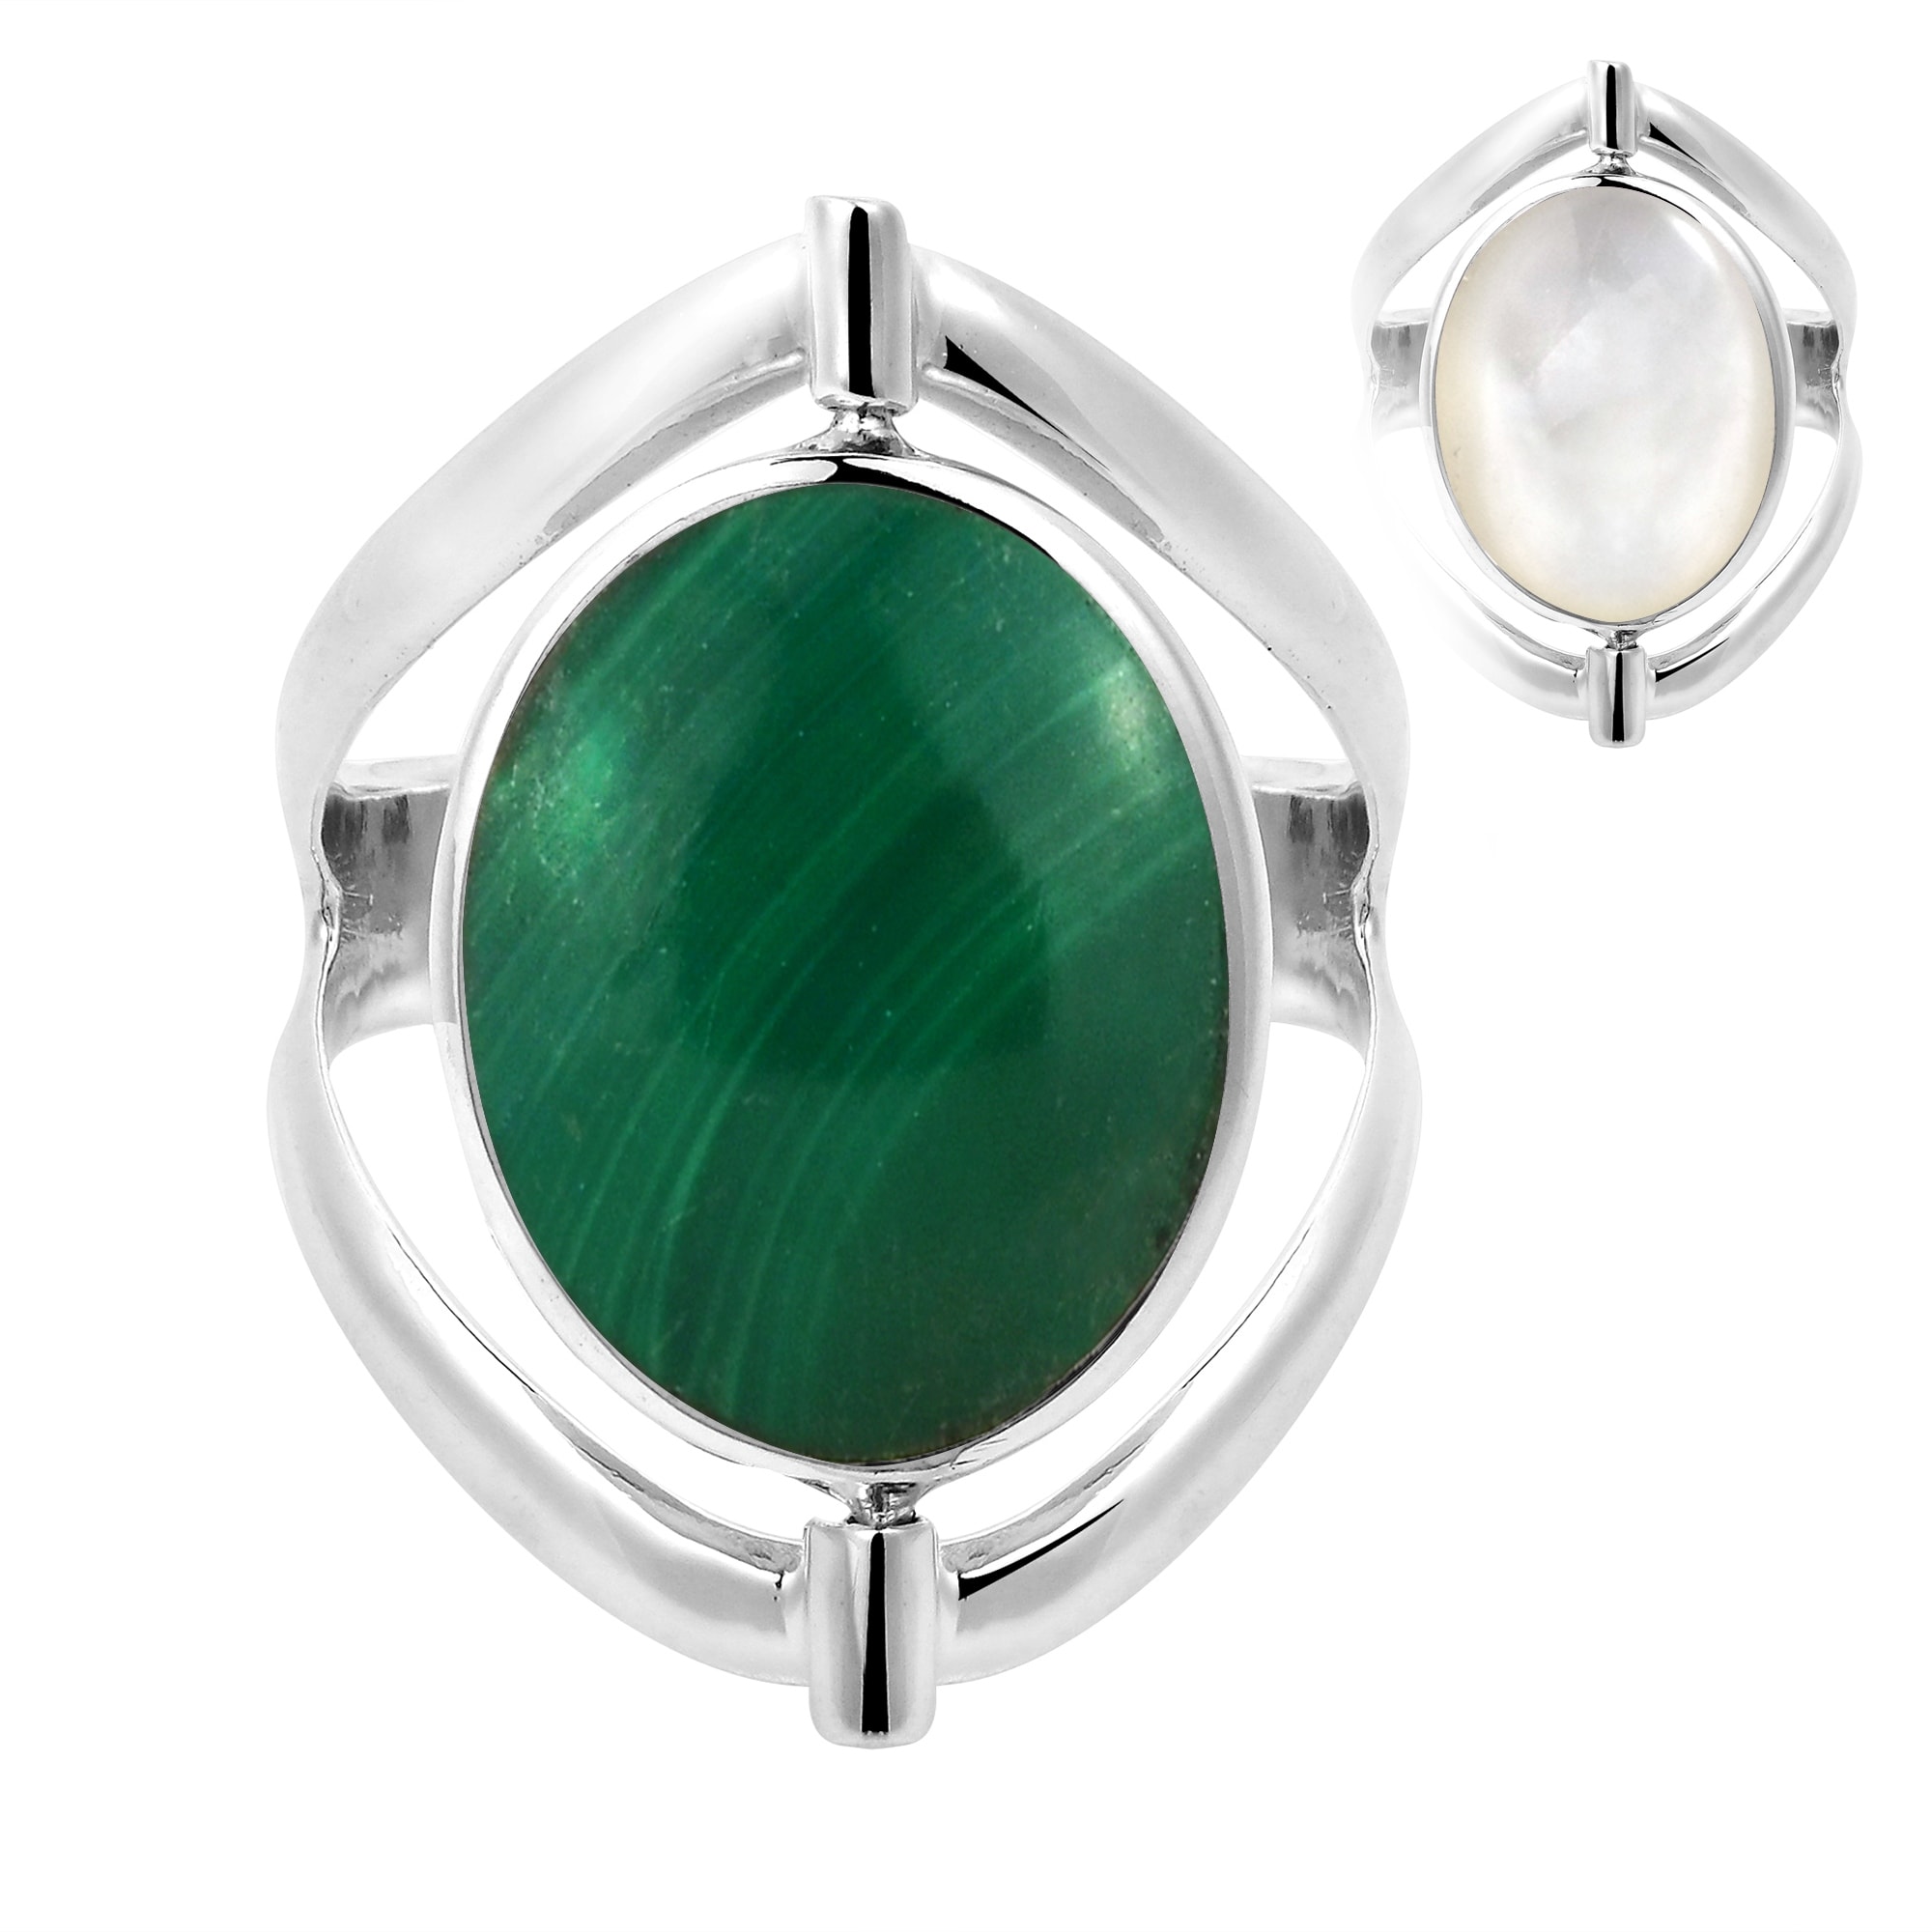 Inexpensive Green Malachite Sterling Silver Overlay Ring Size 9 US Handmade Jewelry 